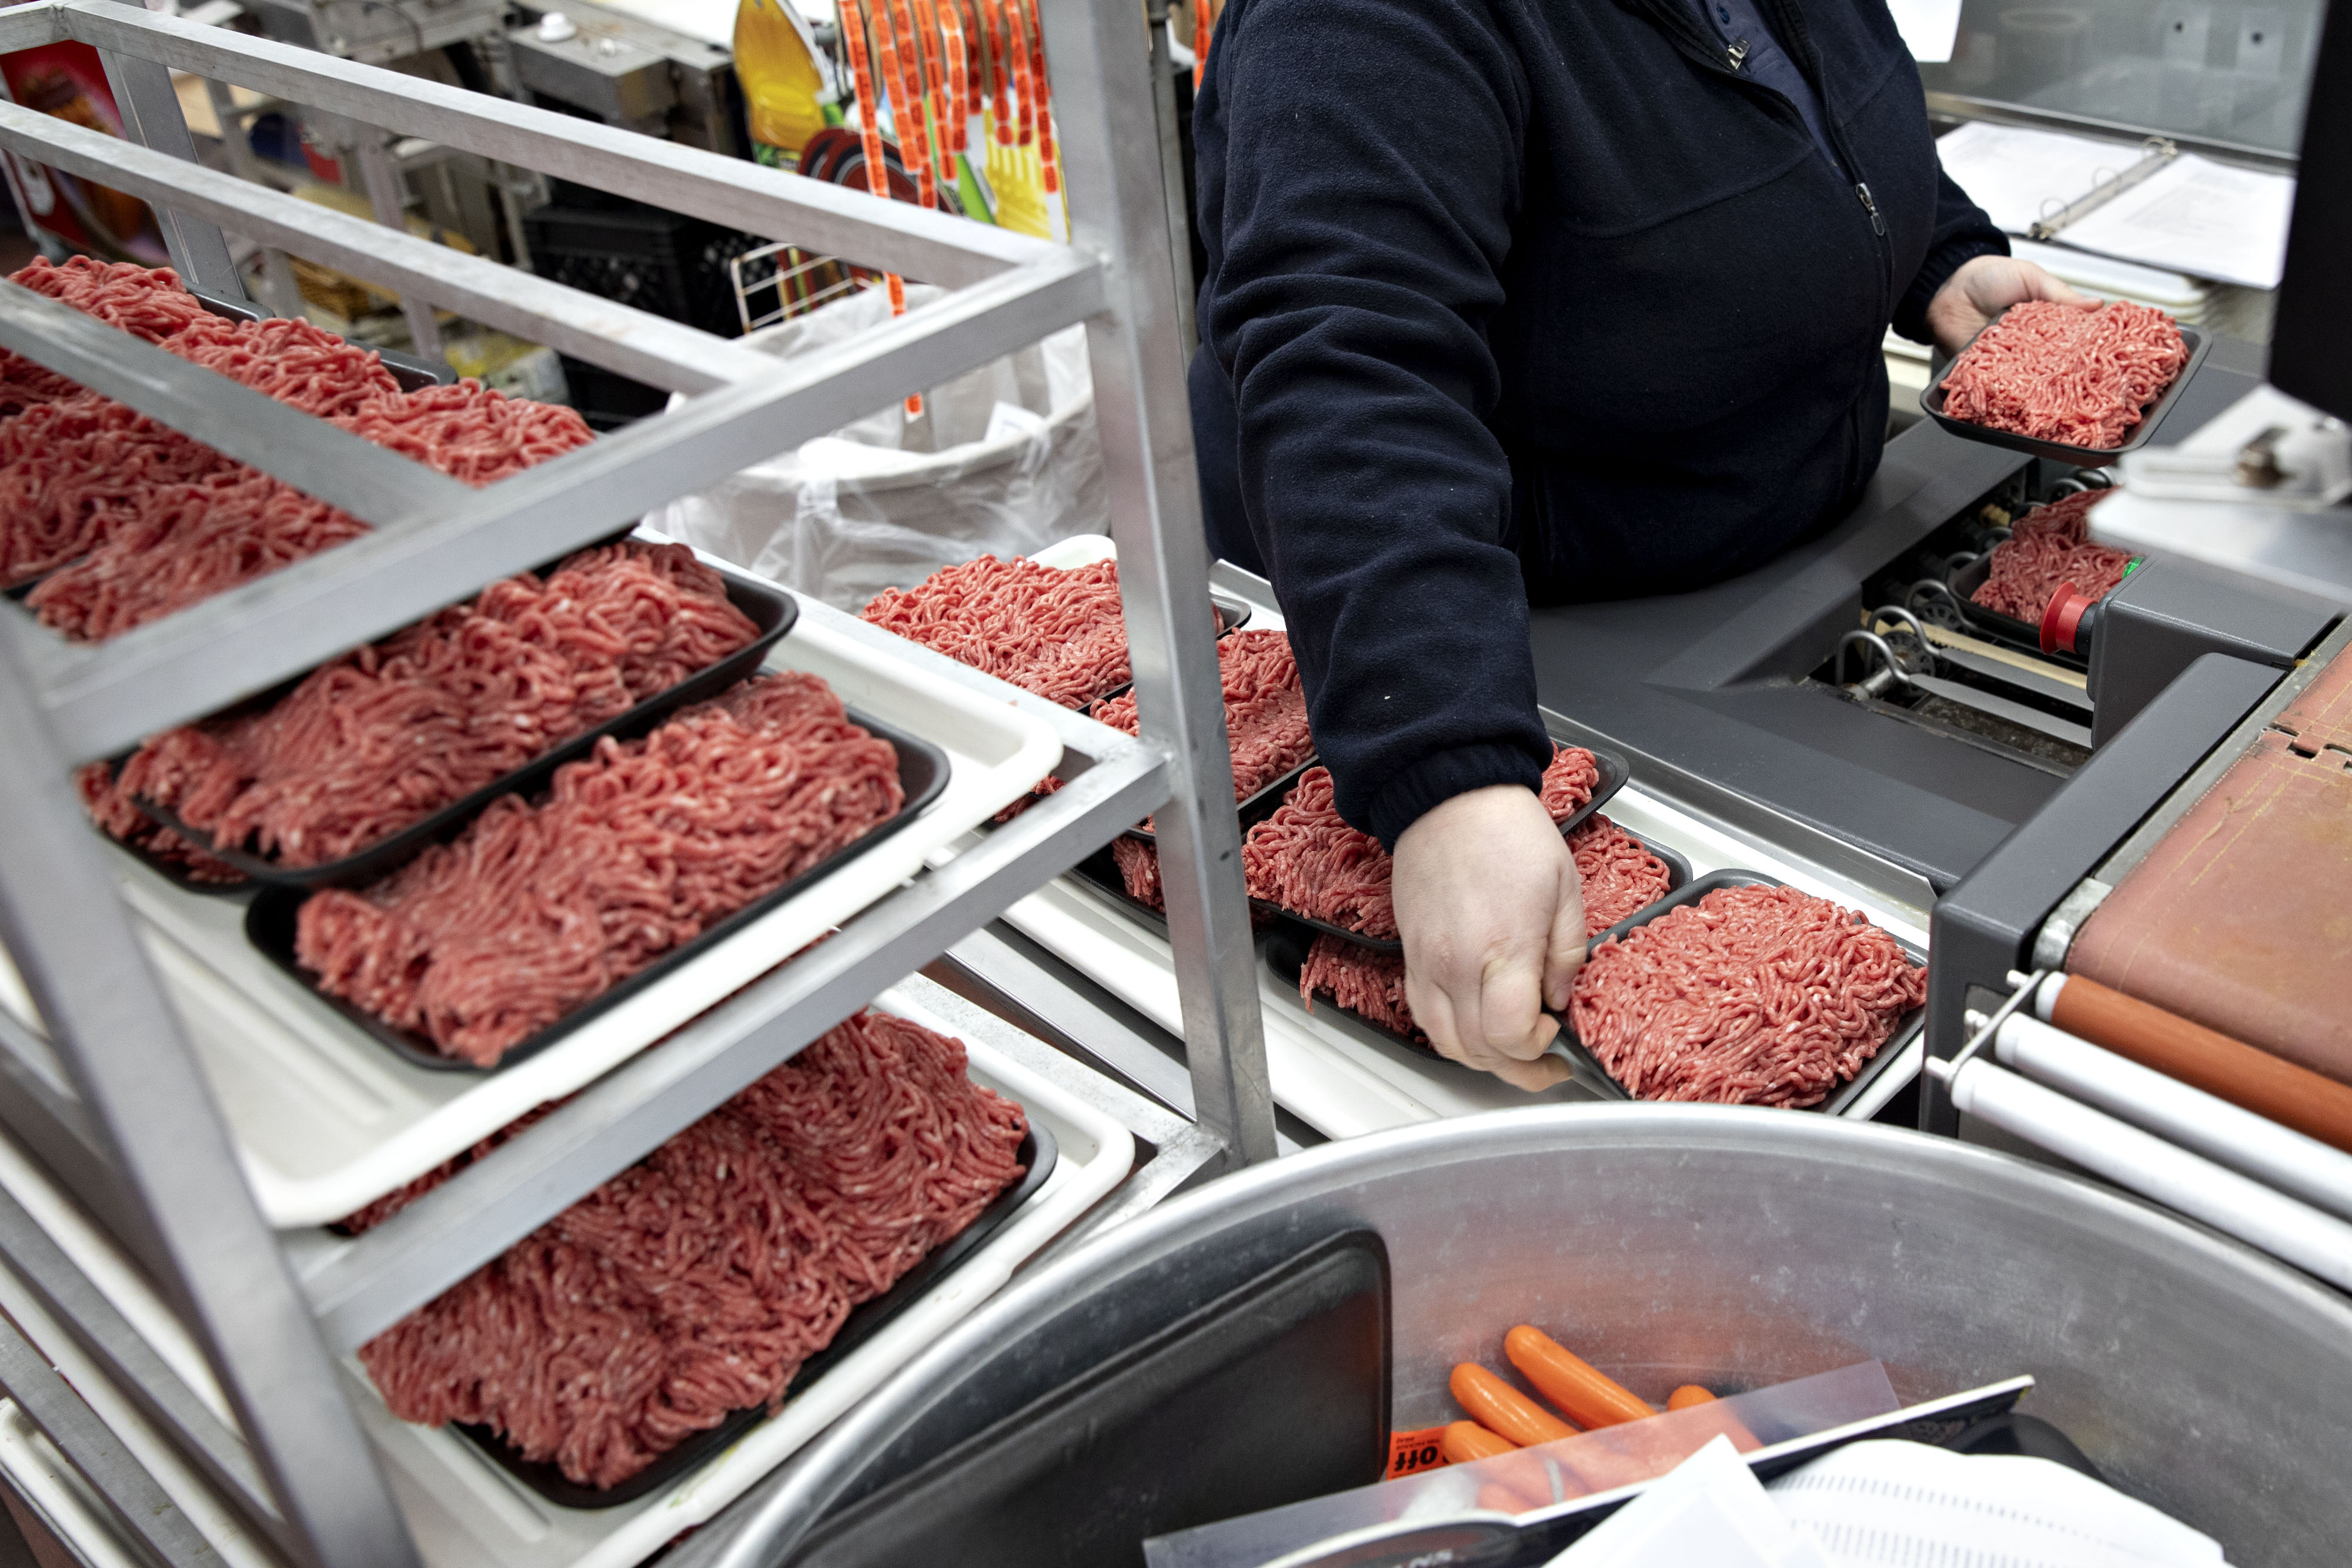 Over 120,000 lbs of ground beef products recalled due to E. coli